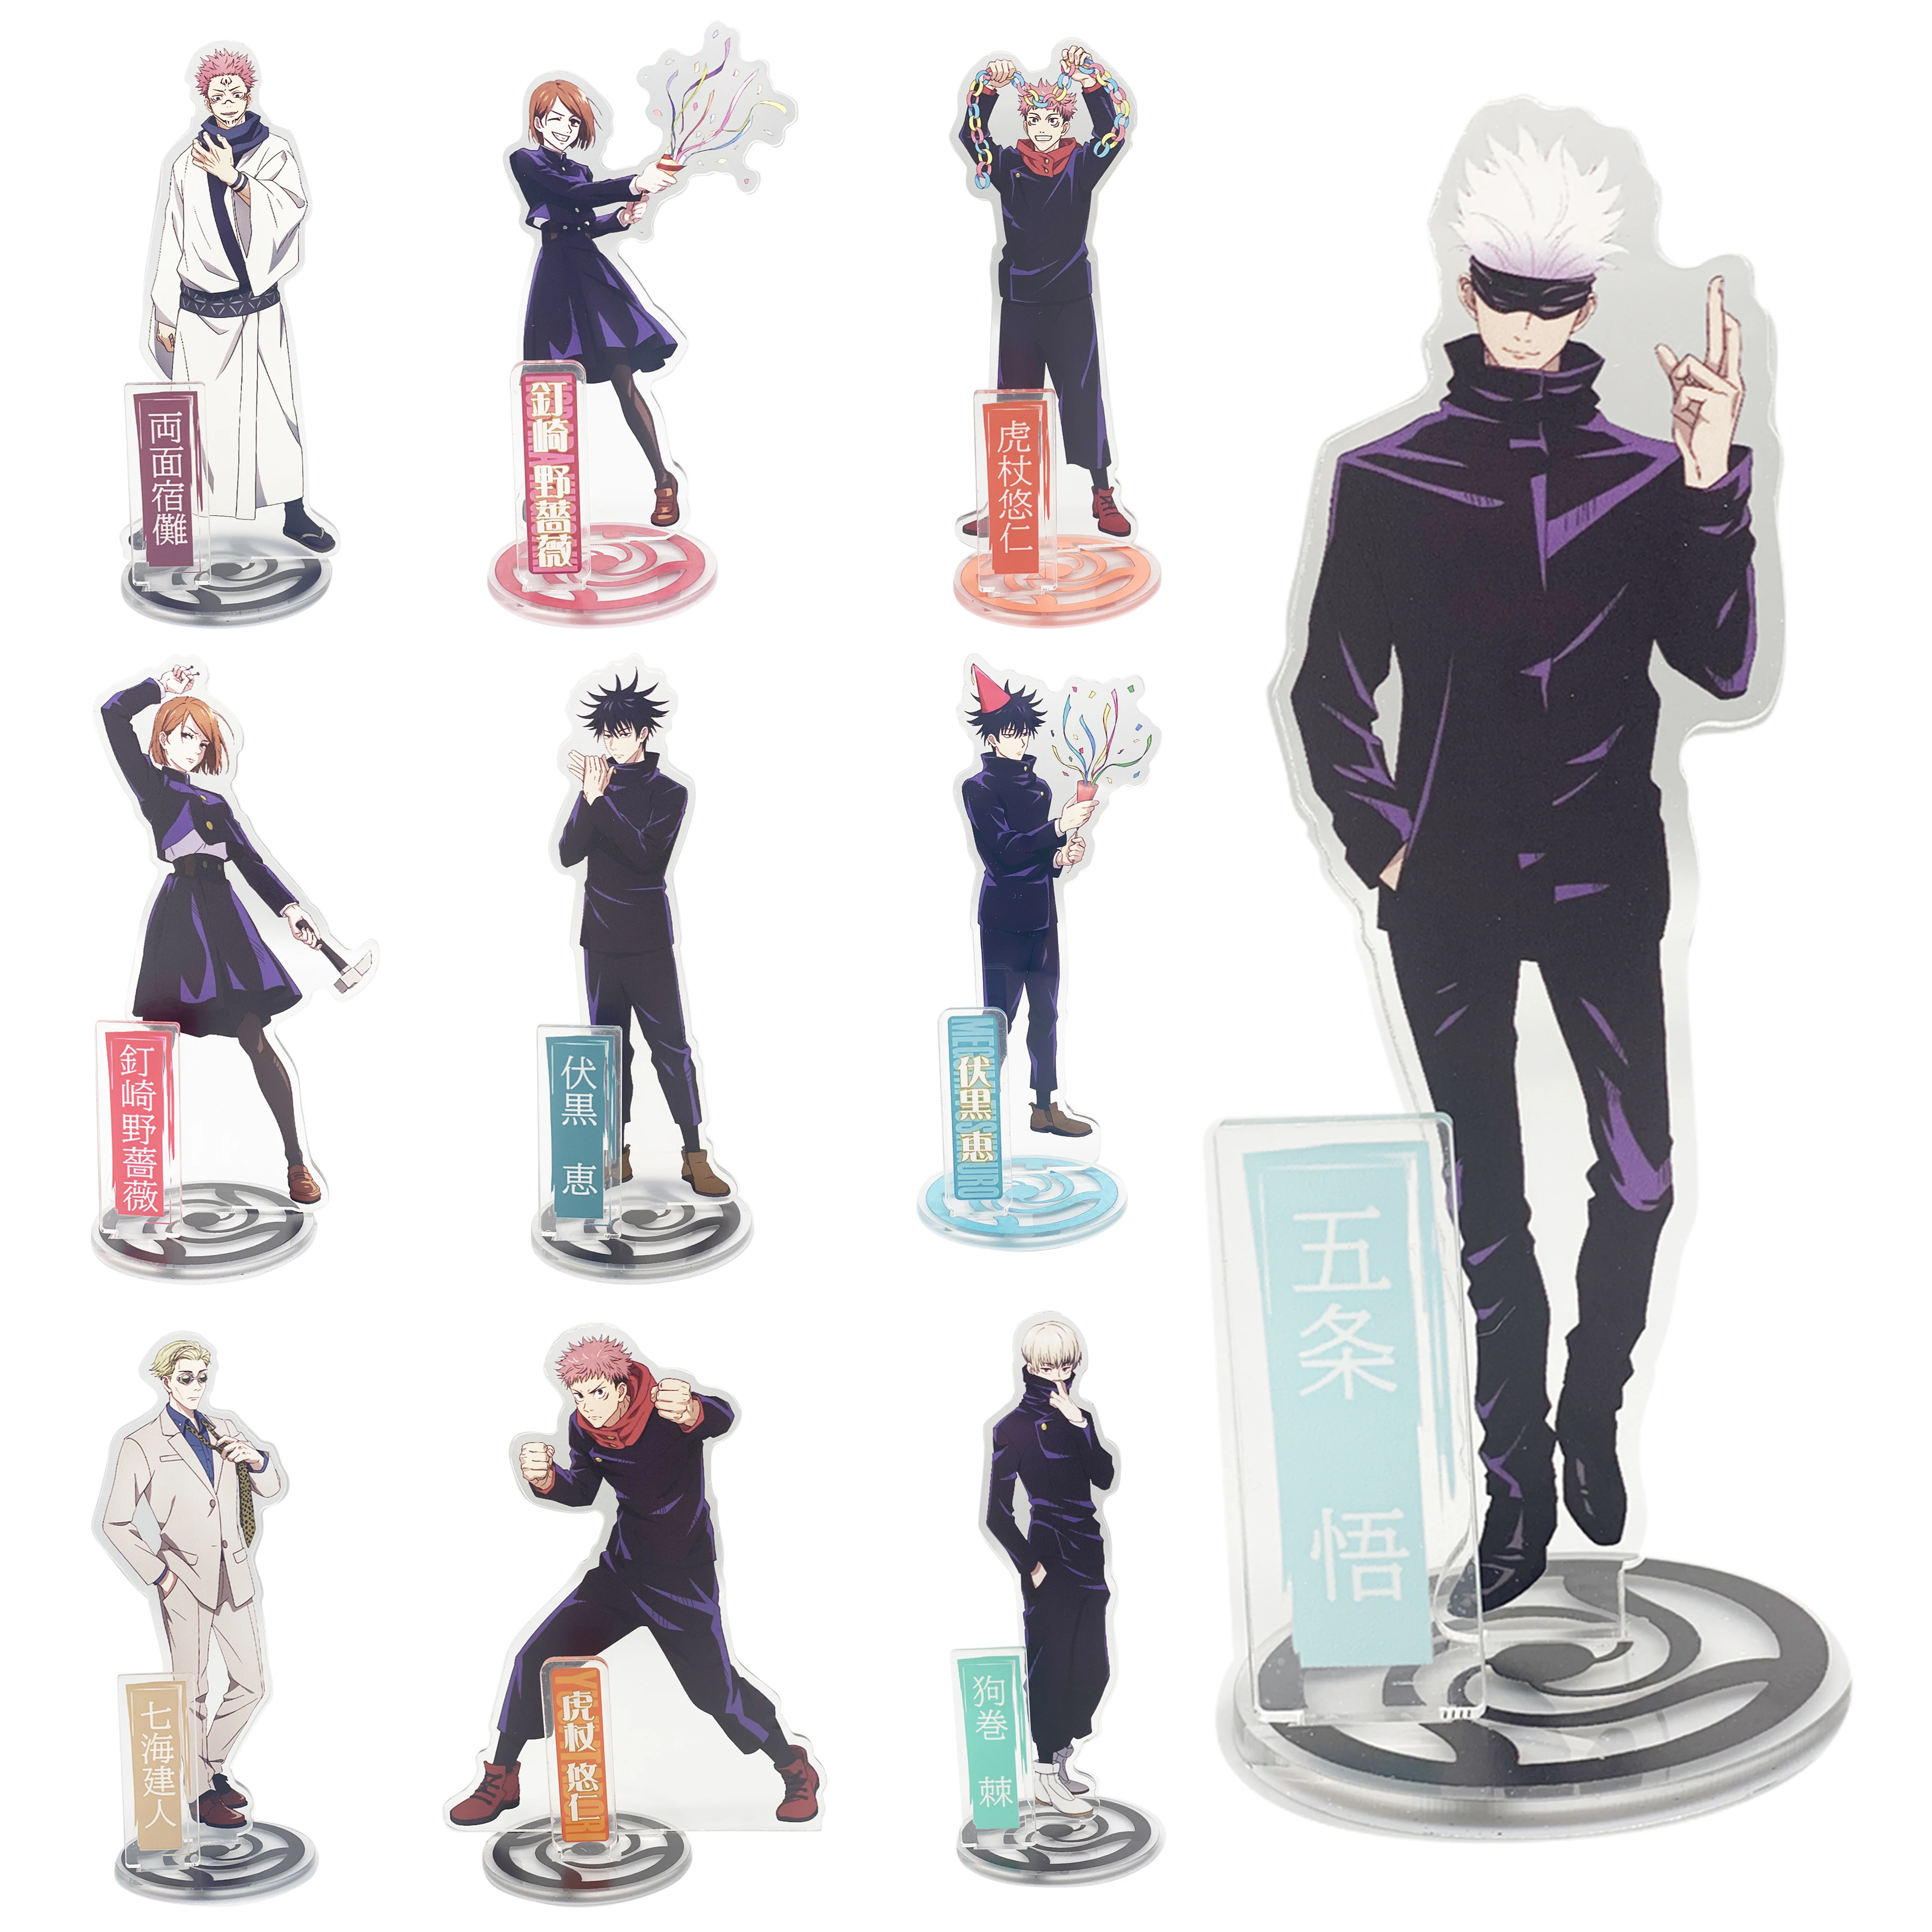 

15cm Anime Jujutsu Kaisen Action Figure Toys Acrylic Desk Stand Figures Models Teenagers Figures Plate Holder Stand Model Toys